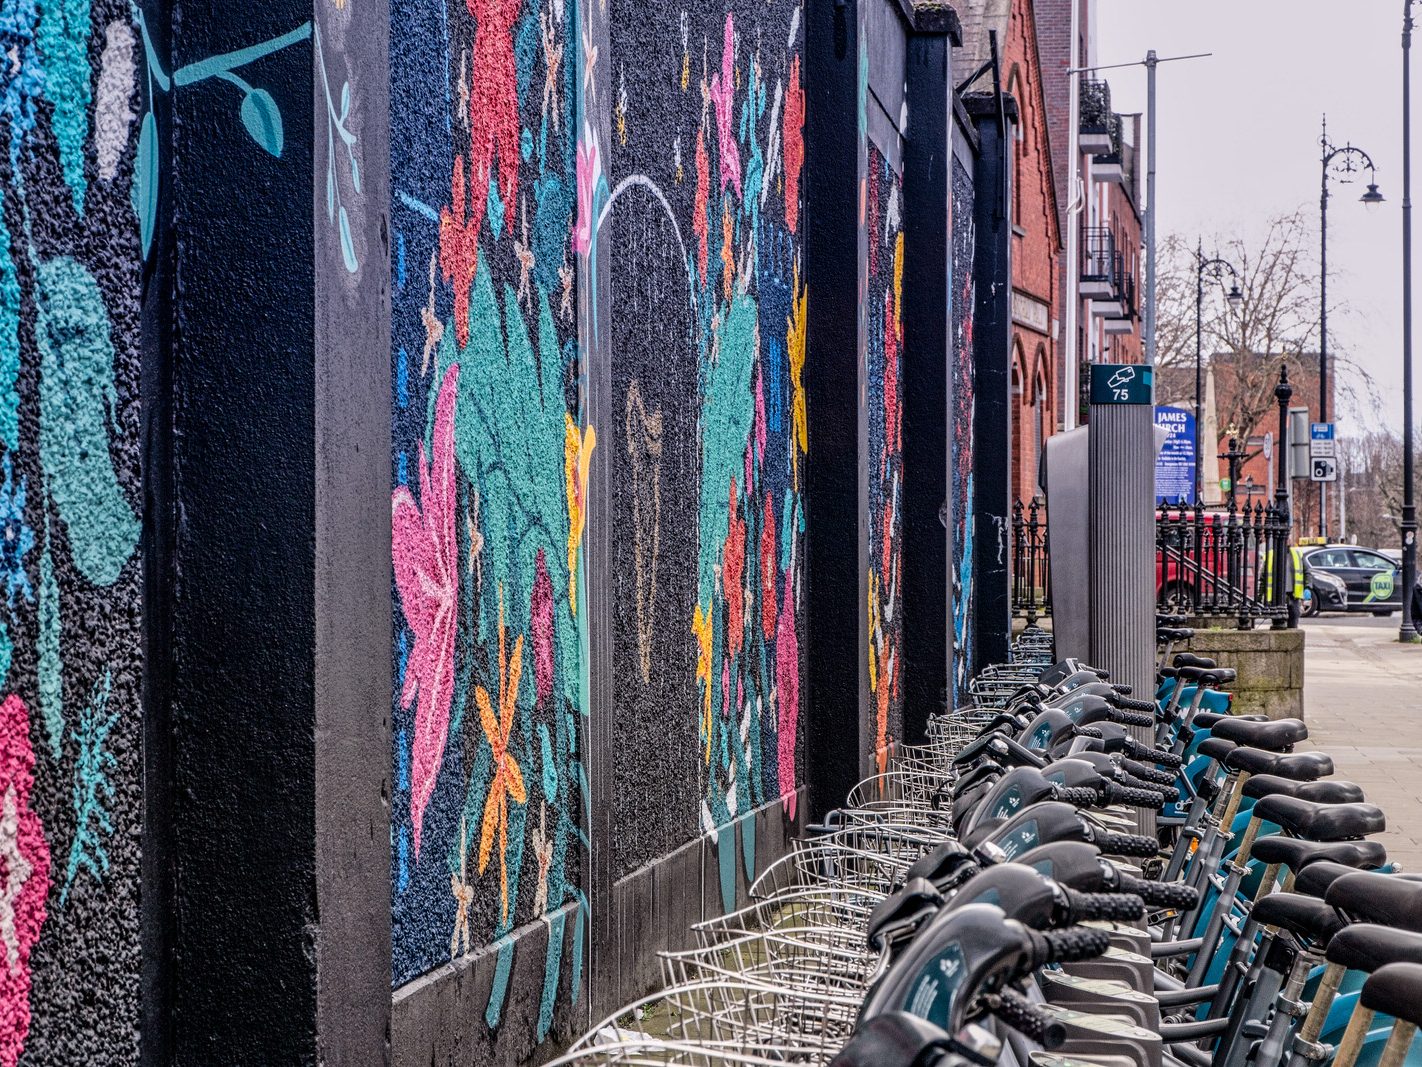 TWO FOR THE PRICE OF ONE [DUBLINBIKES DOCKING STATION 75 AND A MURAL BY HOLLY PEREIRA]-229690-1